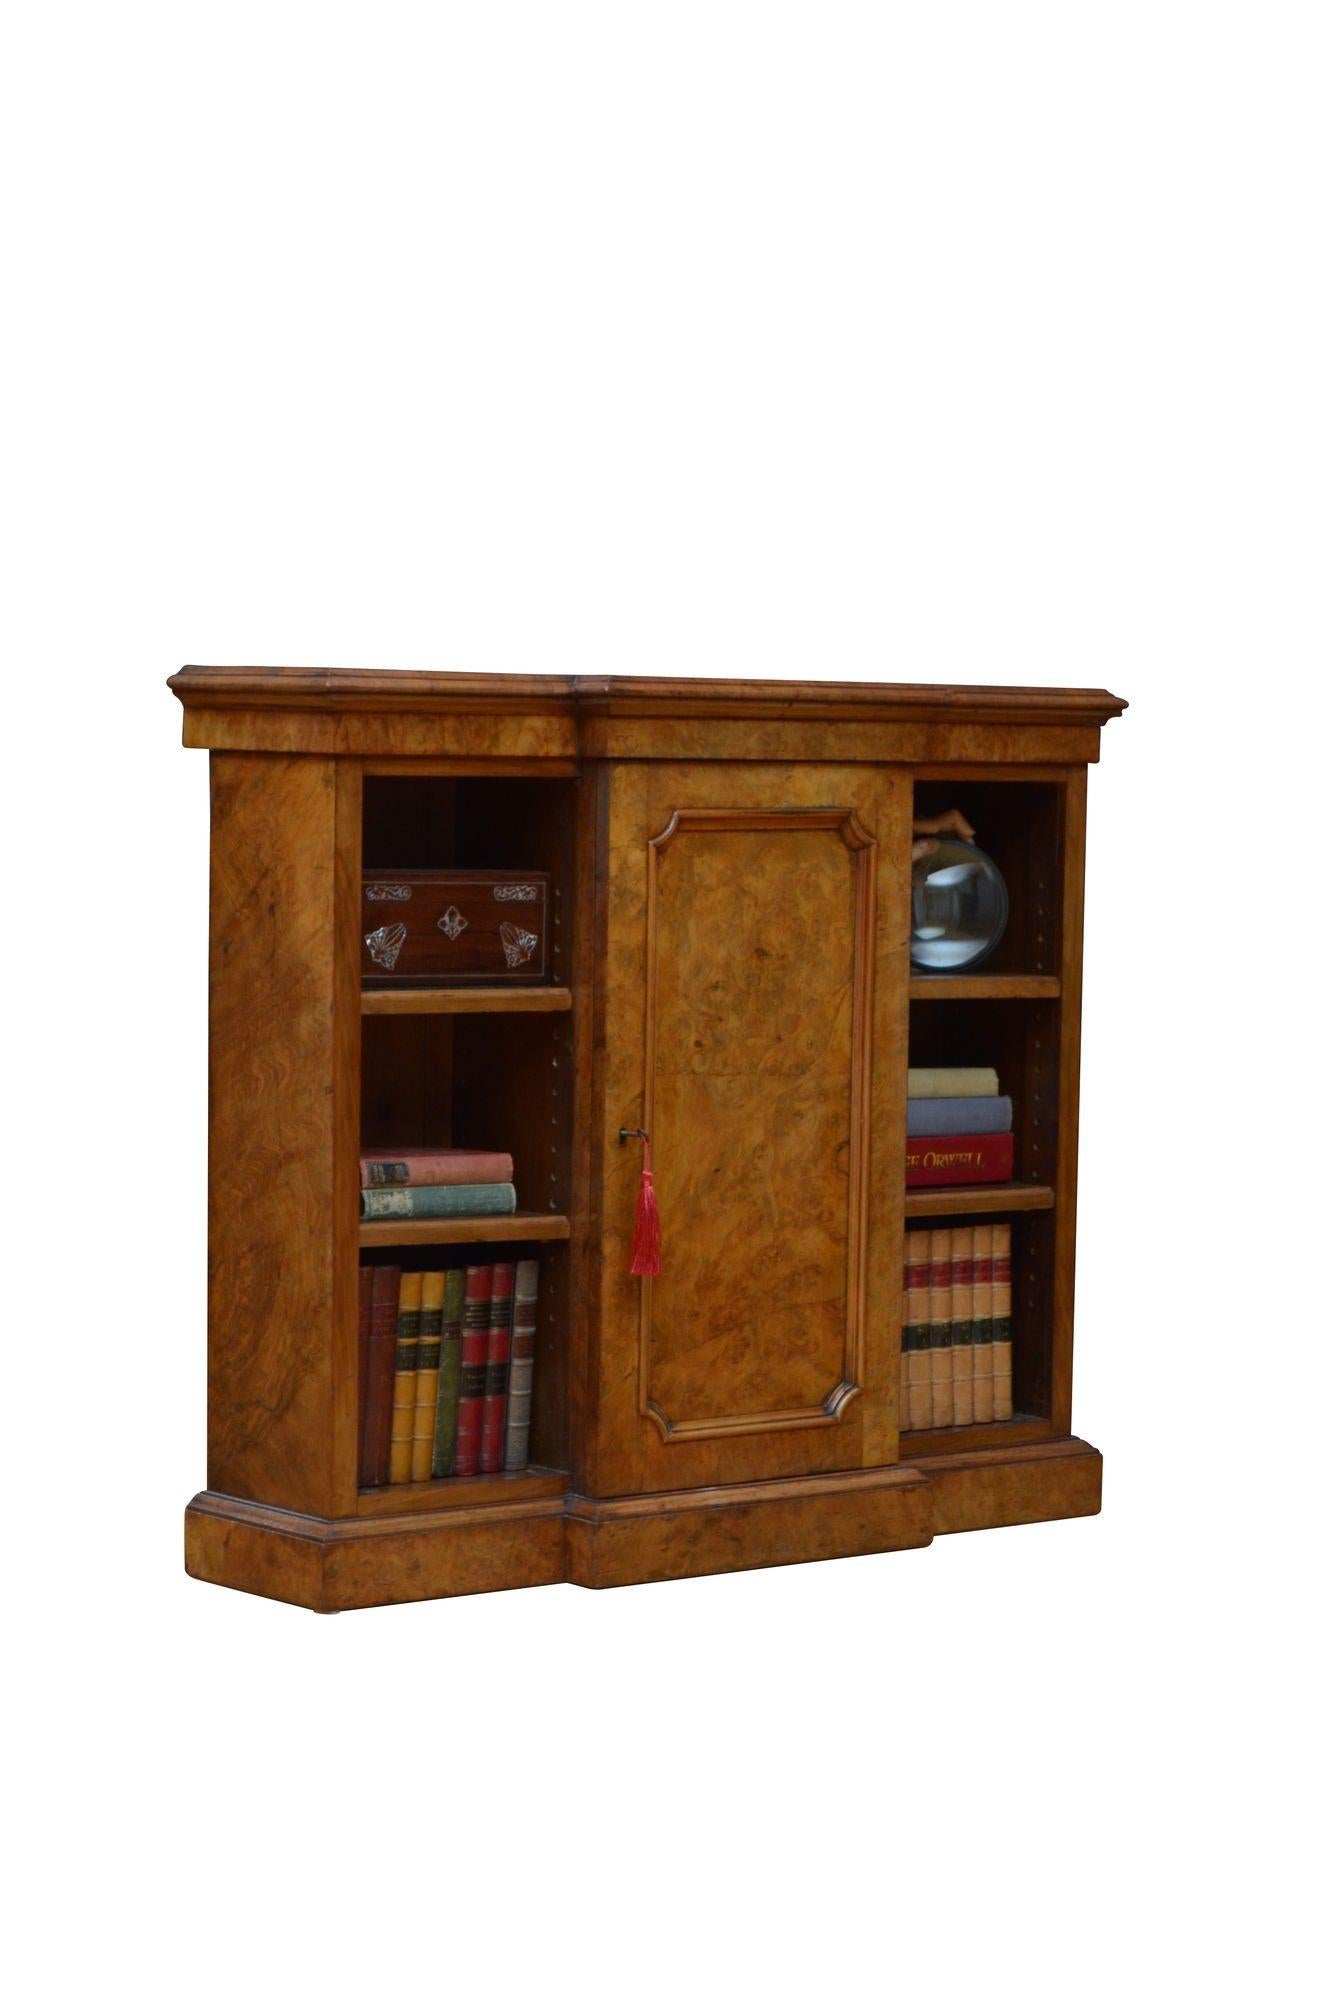 K0617 Superb English Victorian break fronted bookcase / credenza, having burr walnut top with moulded edge above shallow frieze and projecting panelled cupboard door fitted with original working lock, key and hinges and enclosing two height